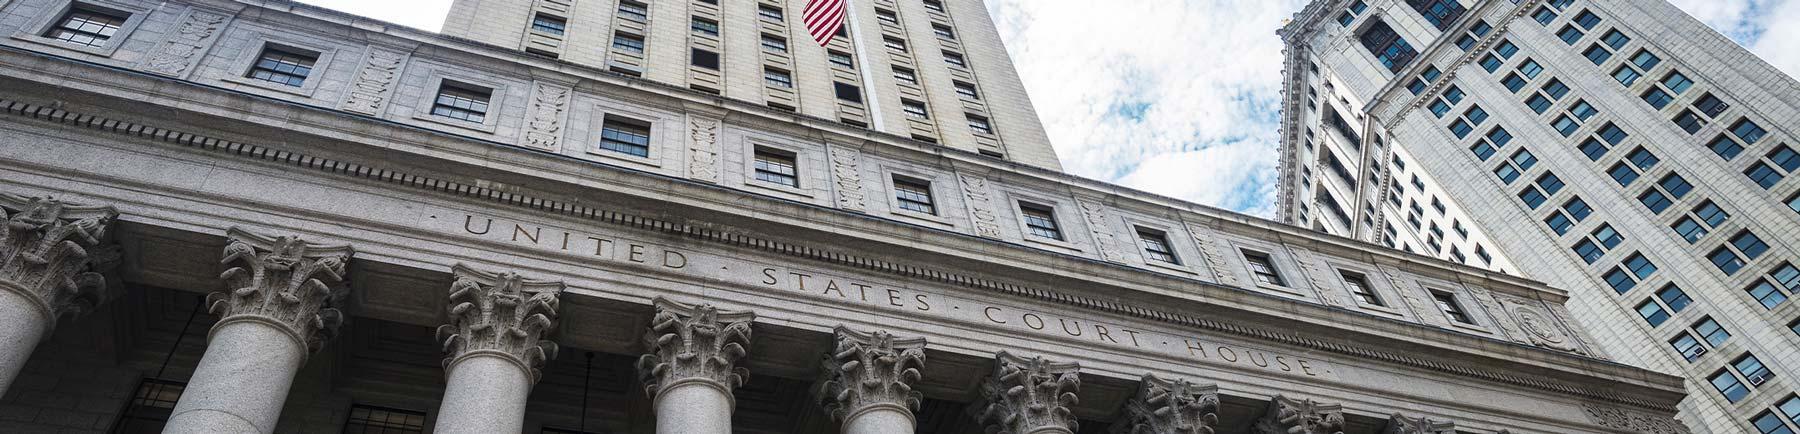 Photo of NYC Courthouse